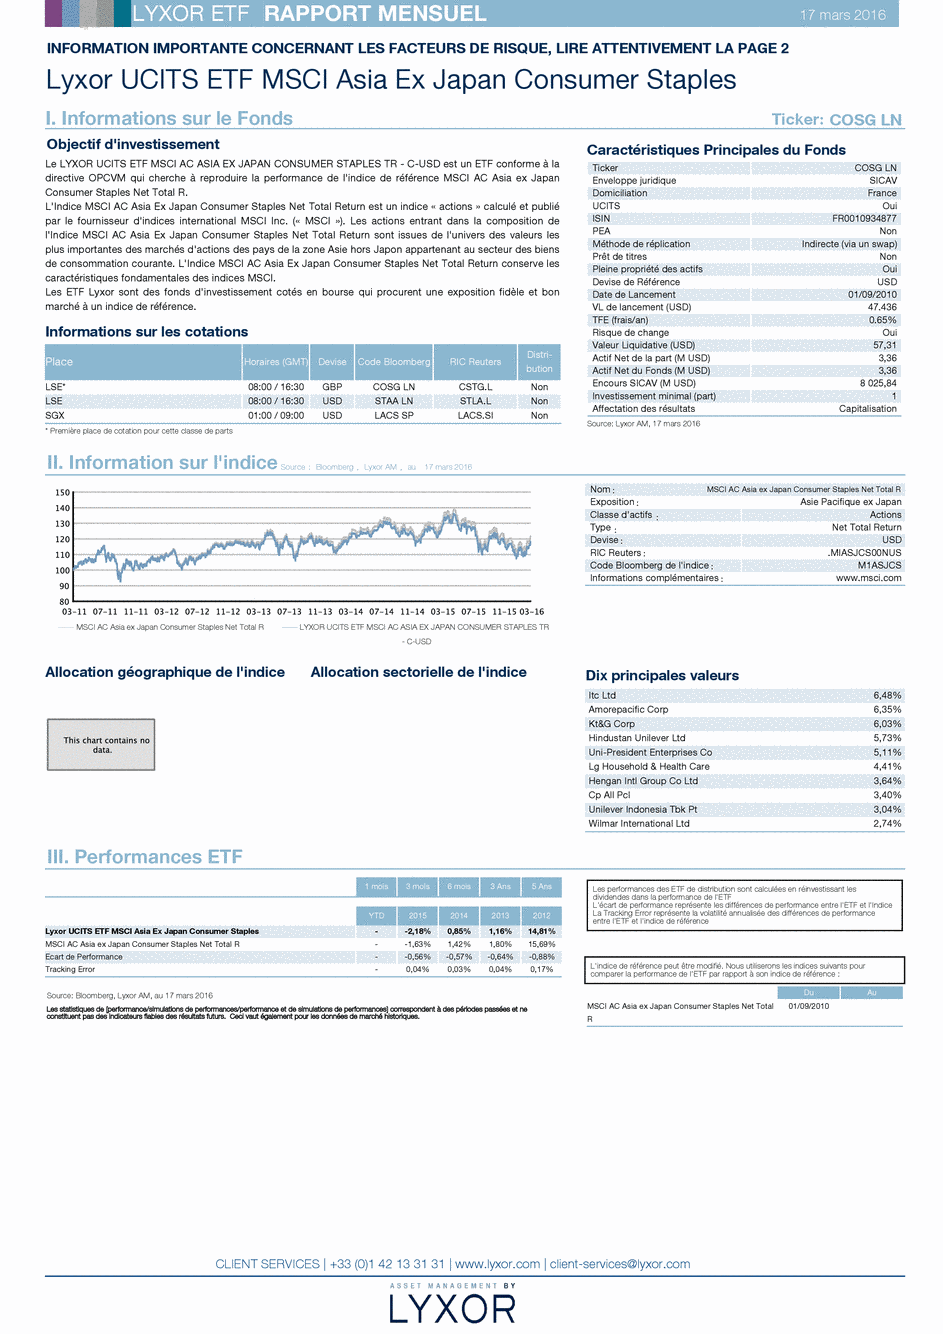 Reporting LYXOR UCITS ETF MSCI AC ASIA EX JAPAN CONSUMER STAPLES TR C USD - 17/03/2016 - French